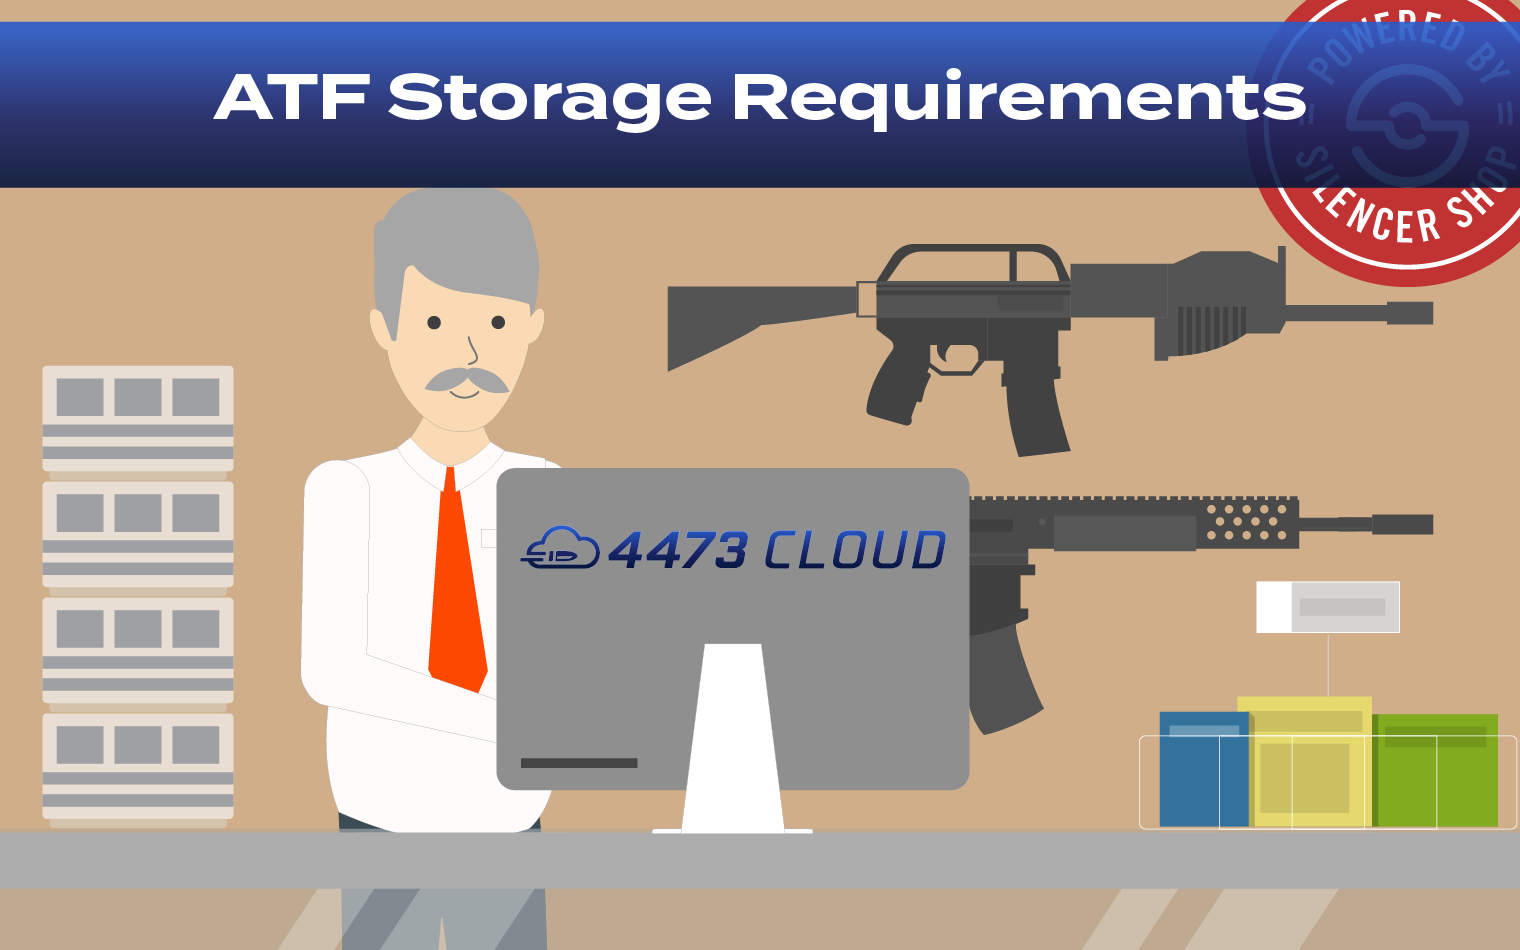 ATF Storage Requirements, 4473 Cloud